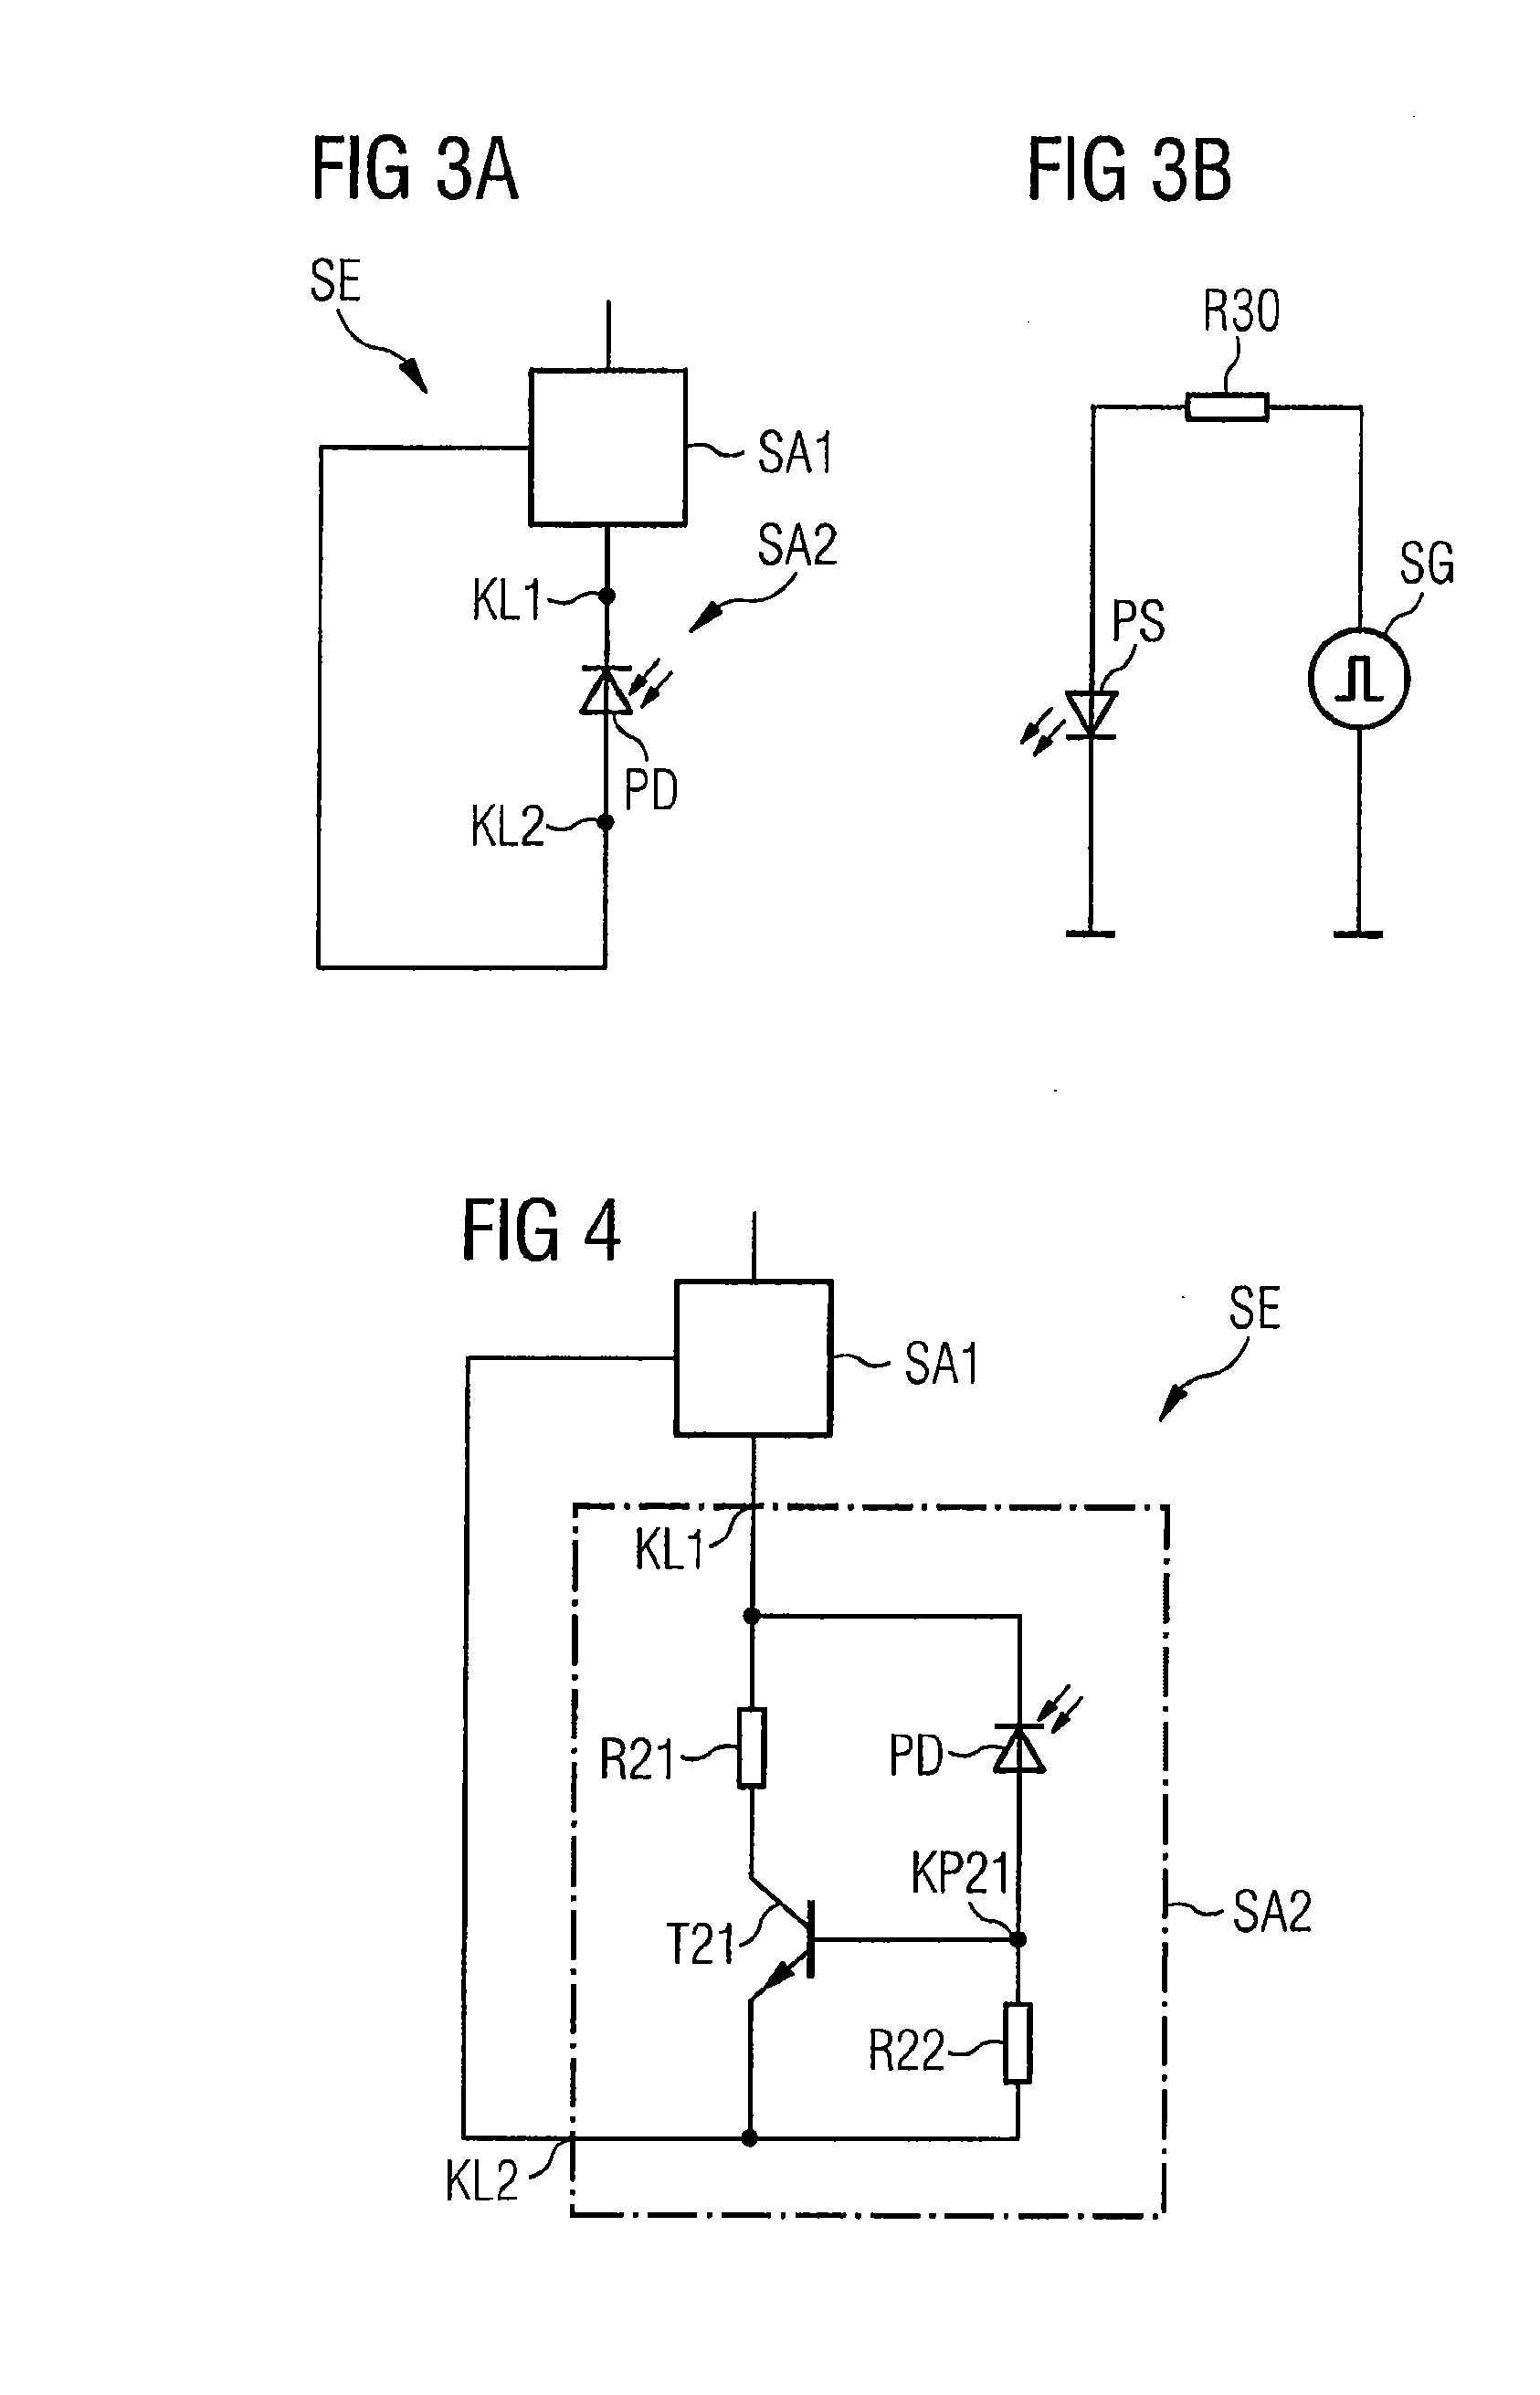 Switching device and switching arrangements for switching at high operating voltage